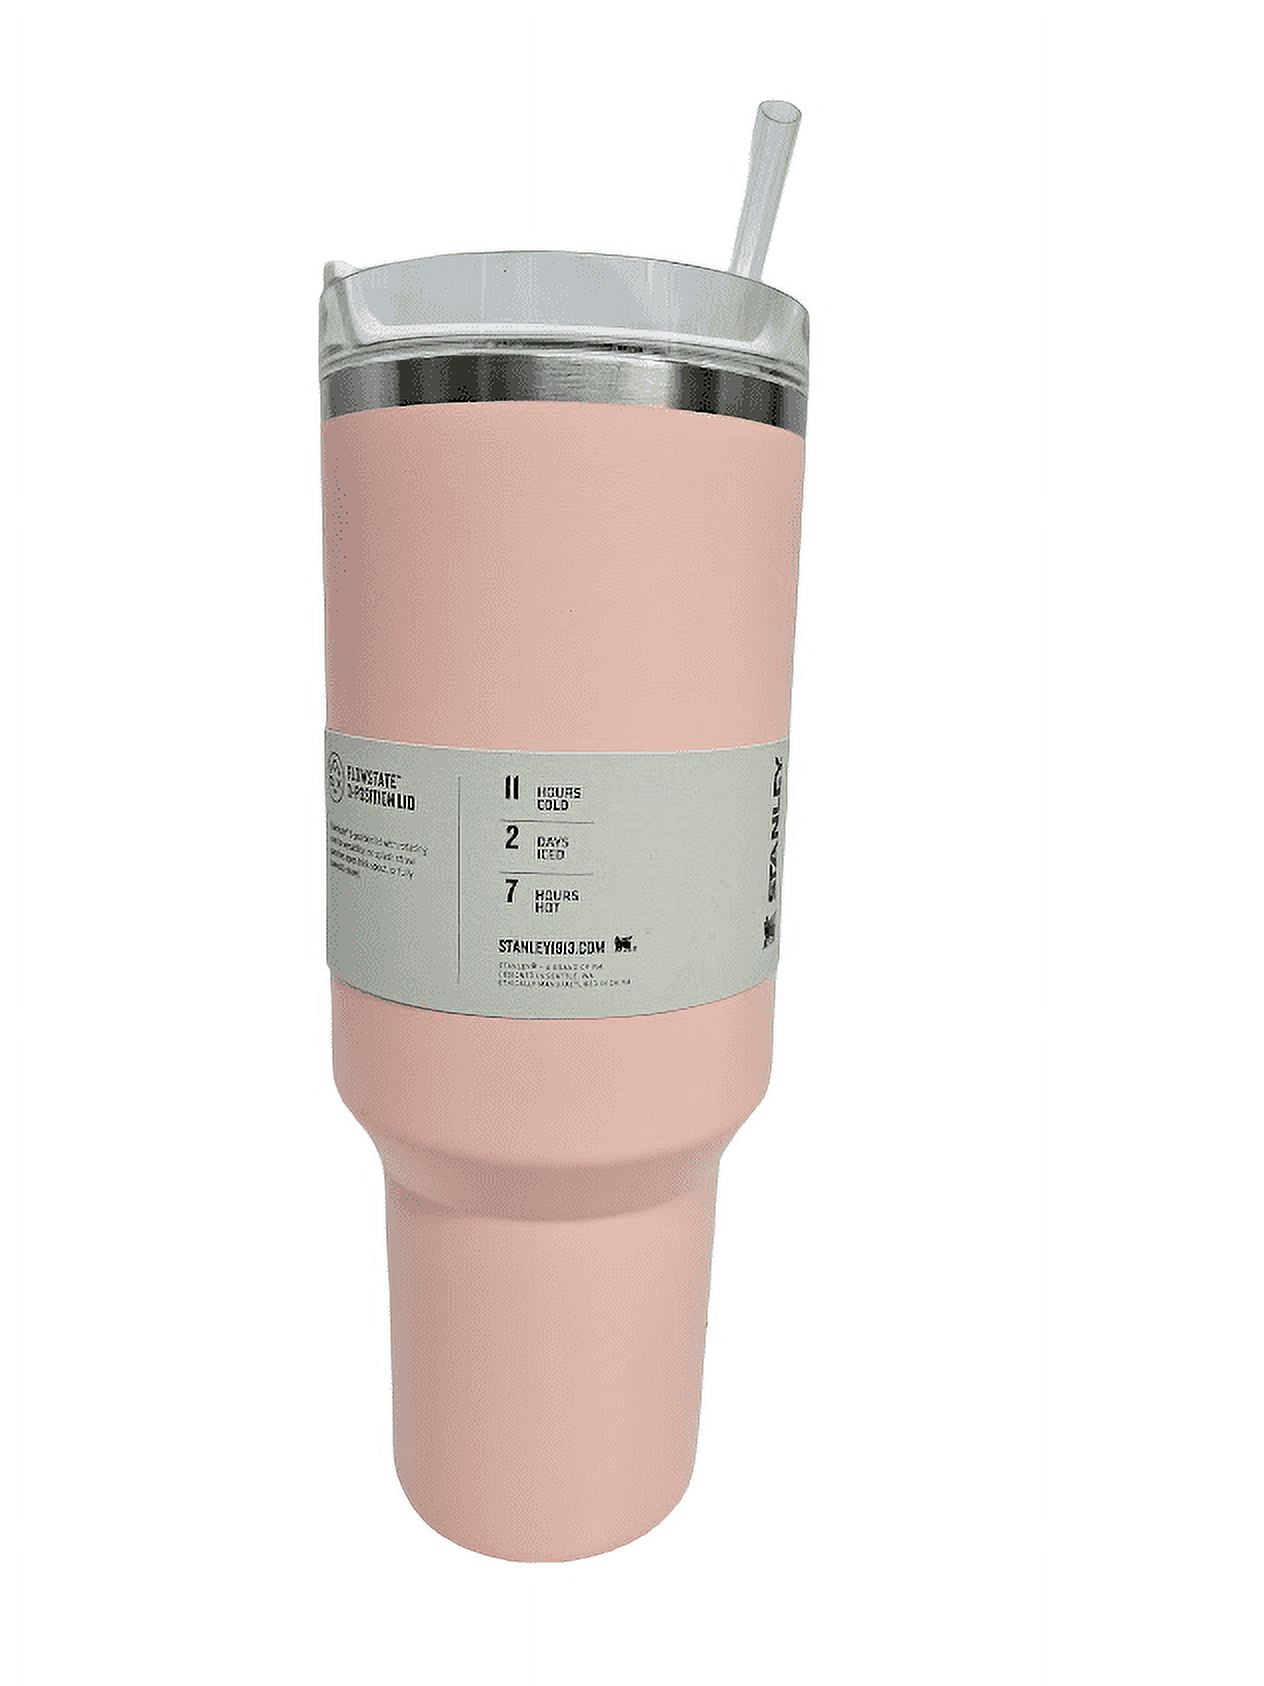 LIMITED 🎯 EDITION! New Stanley Quencher H2.0 40oz Tumbler- PEACH Pink